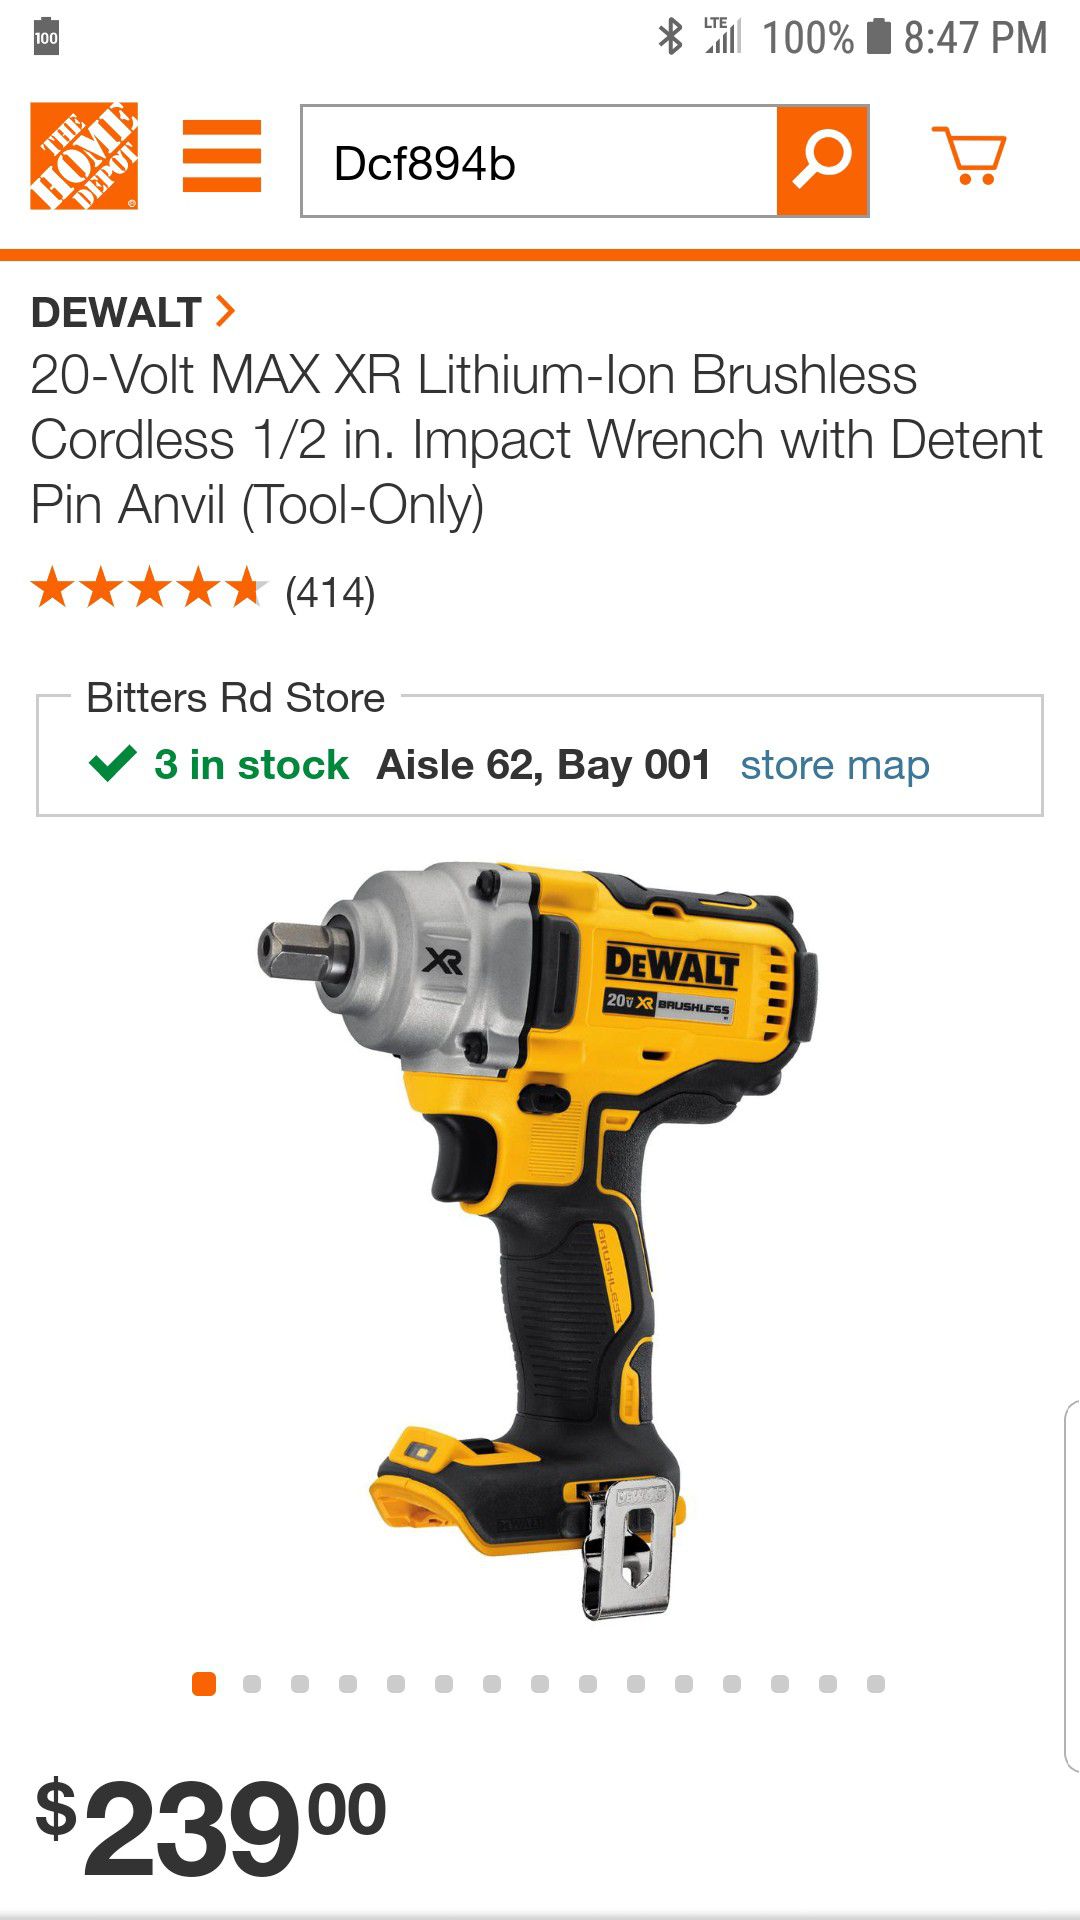 Cordless 1/2 ' Impact Wrench with Detent Pin Anvil [Tool Only ]